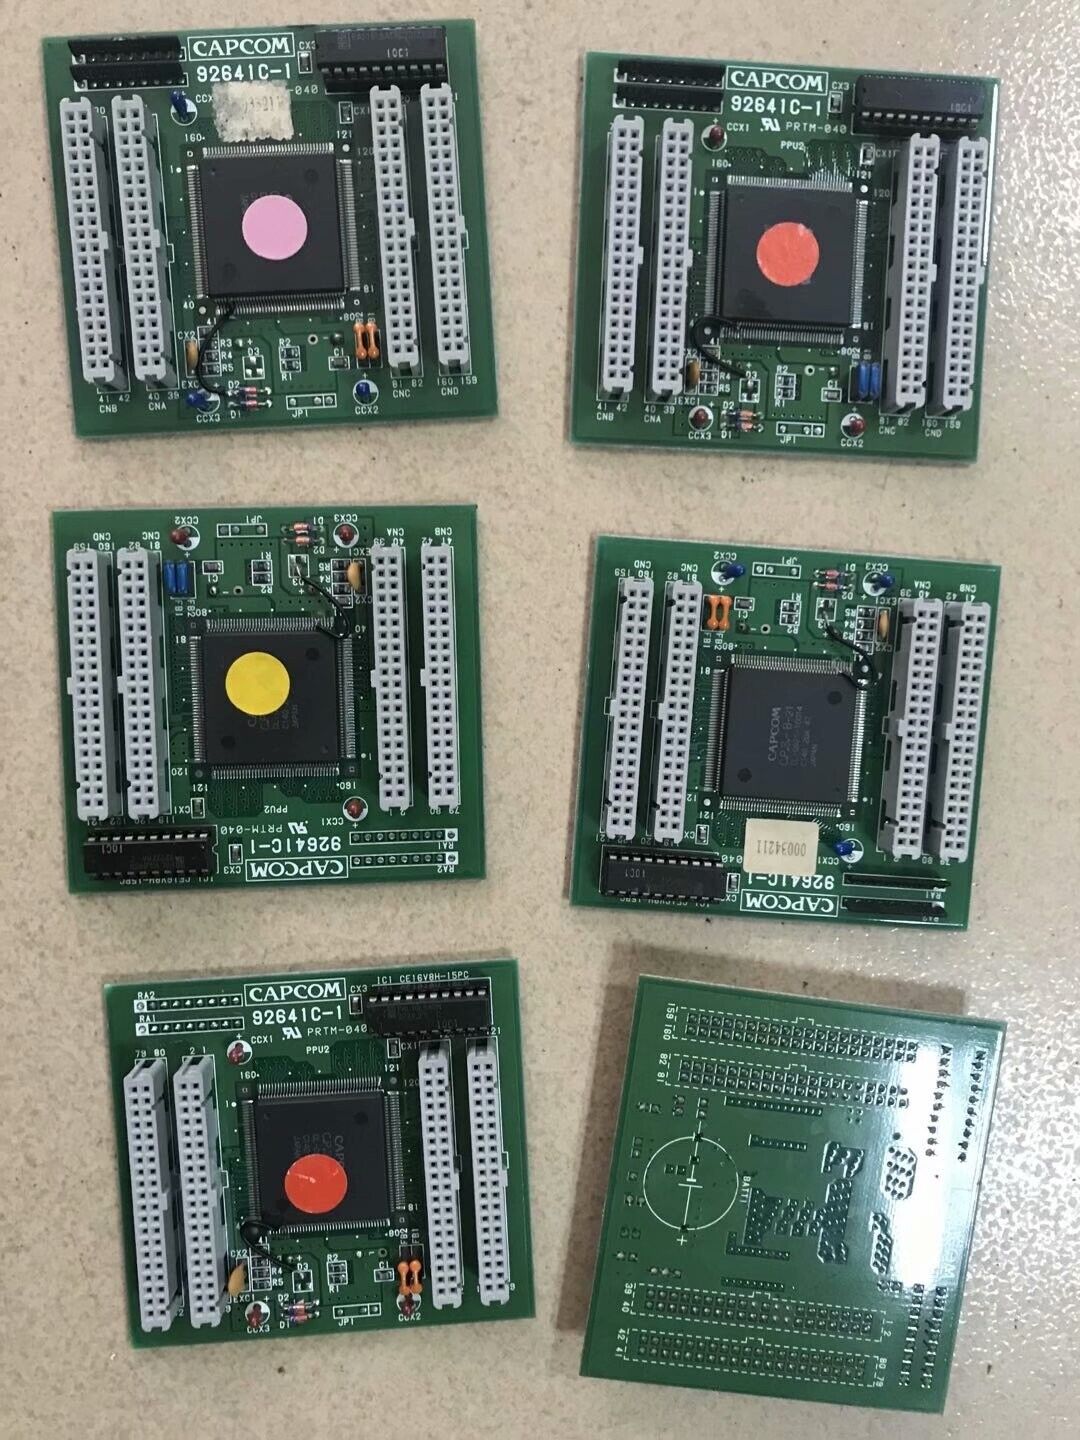 5 pcs/lot capcom cps1 arcade game C board(used for converted pcb)